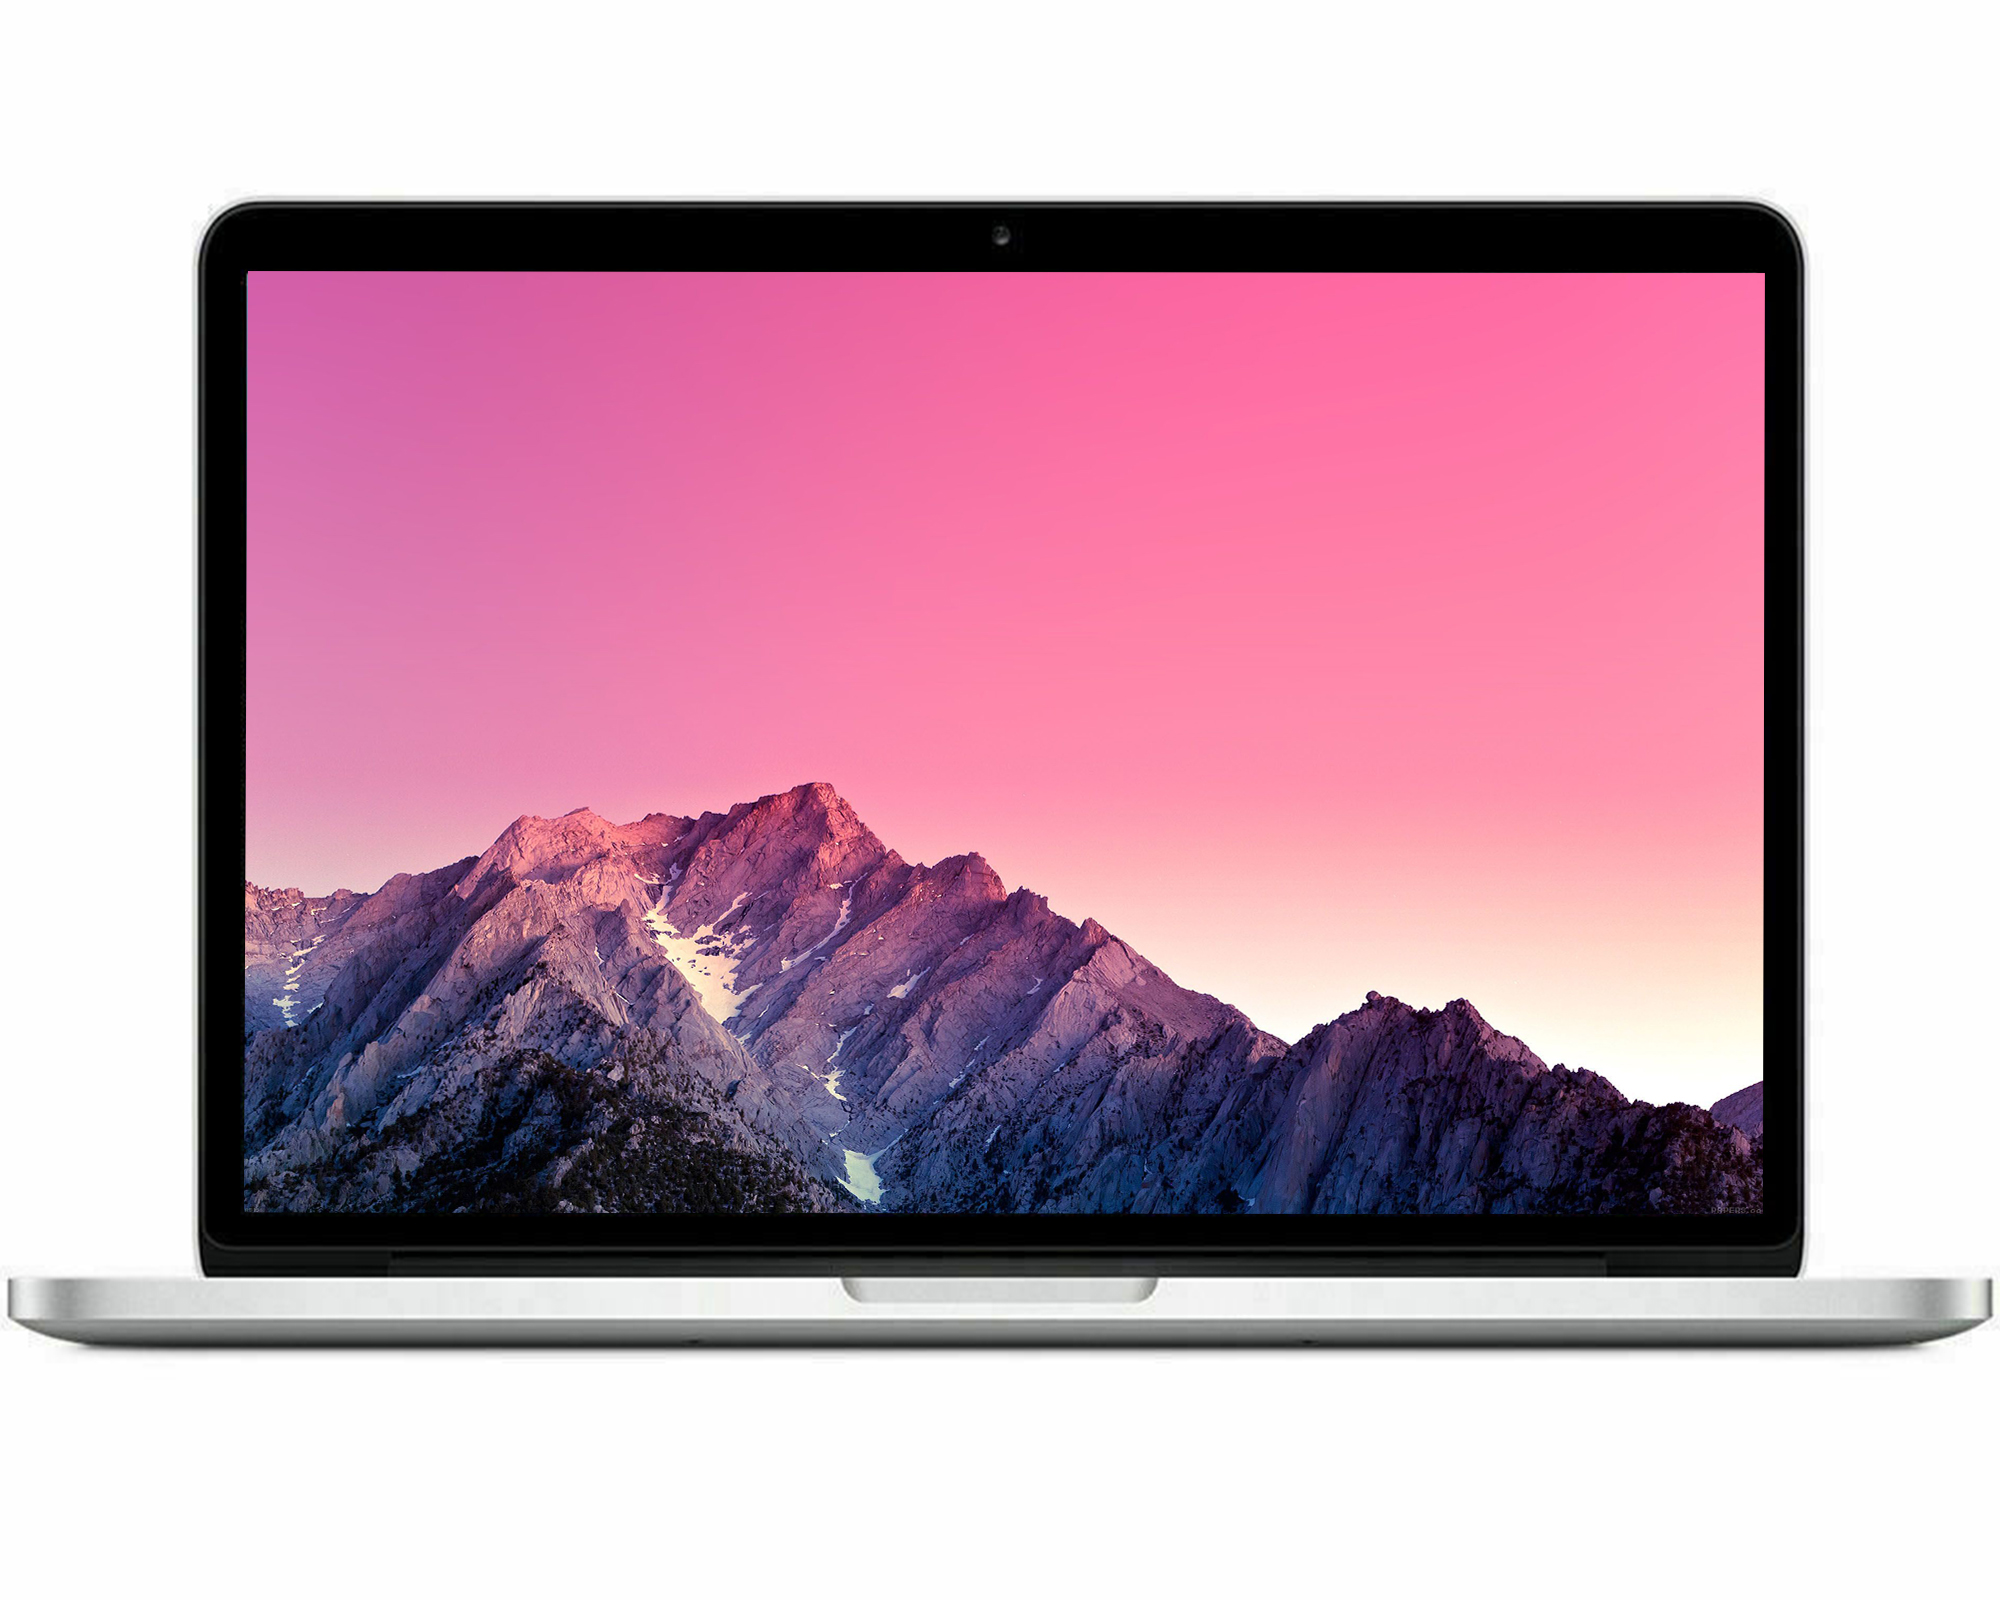 Restored | Apple MacBook Pro | 13.3-inch Touch Bar | 3.1GHz | i5 | 8GB RAM | 256GB SSD | Bundle: USA Essentials Bluetooth/Wireless Airbuds, Black Case, Wireless Mouse By Certified 2 Day Express - image 5 of 5